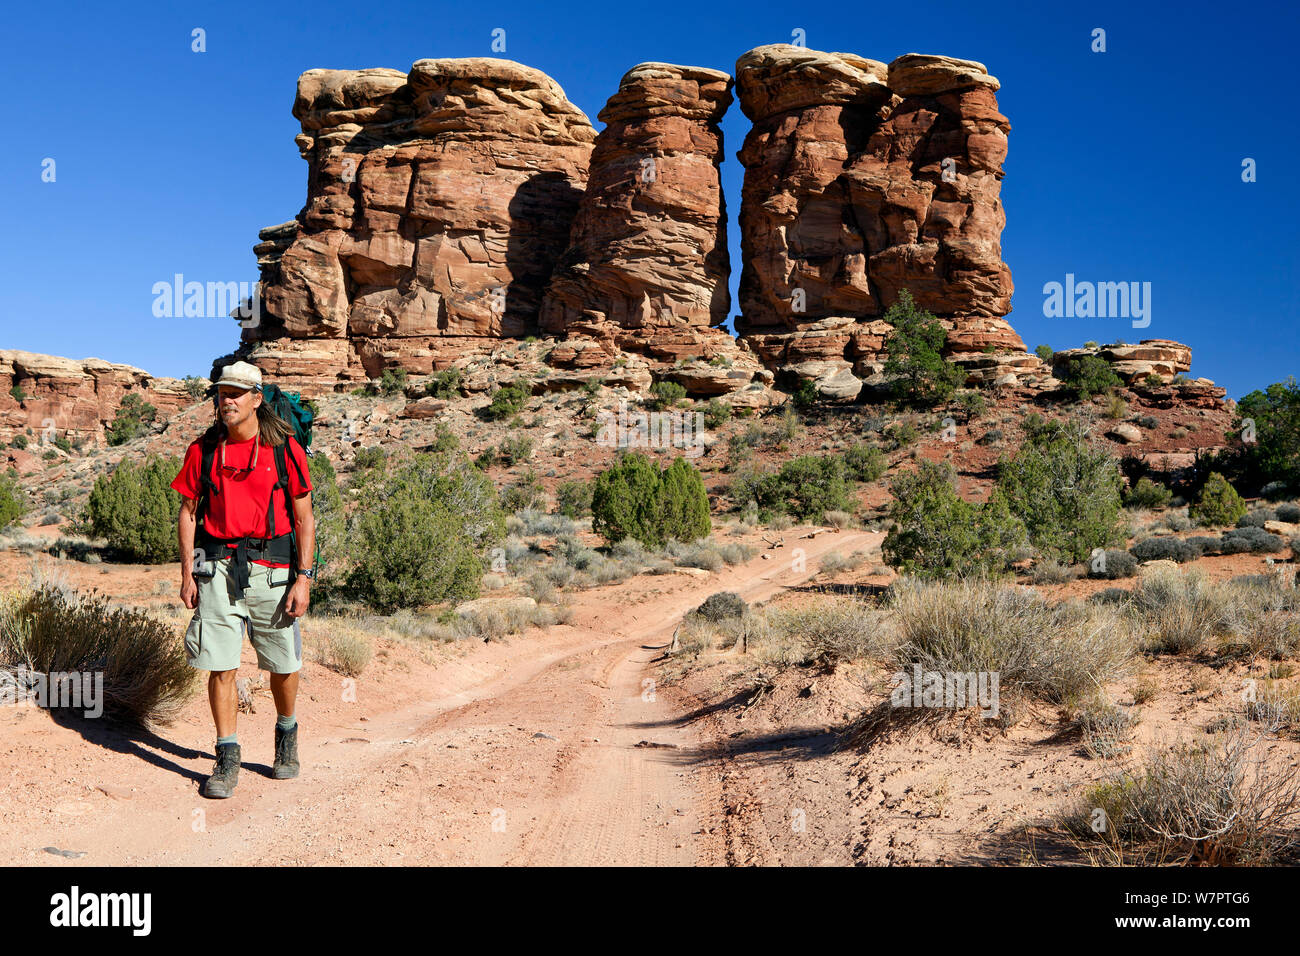 Hiker on the Elephant Hill 4-wheel drive trail in the Needles District. Canyonlands National Park, Utah, October 2012. Model released. Stock Photo